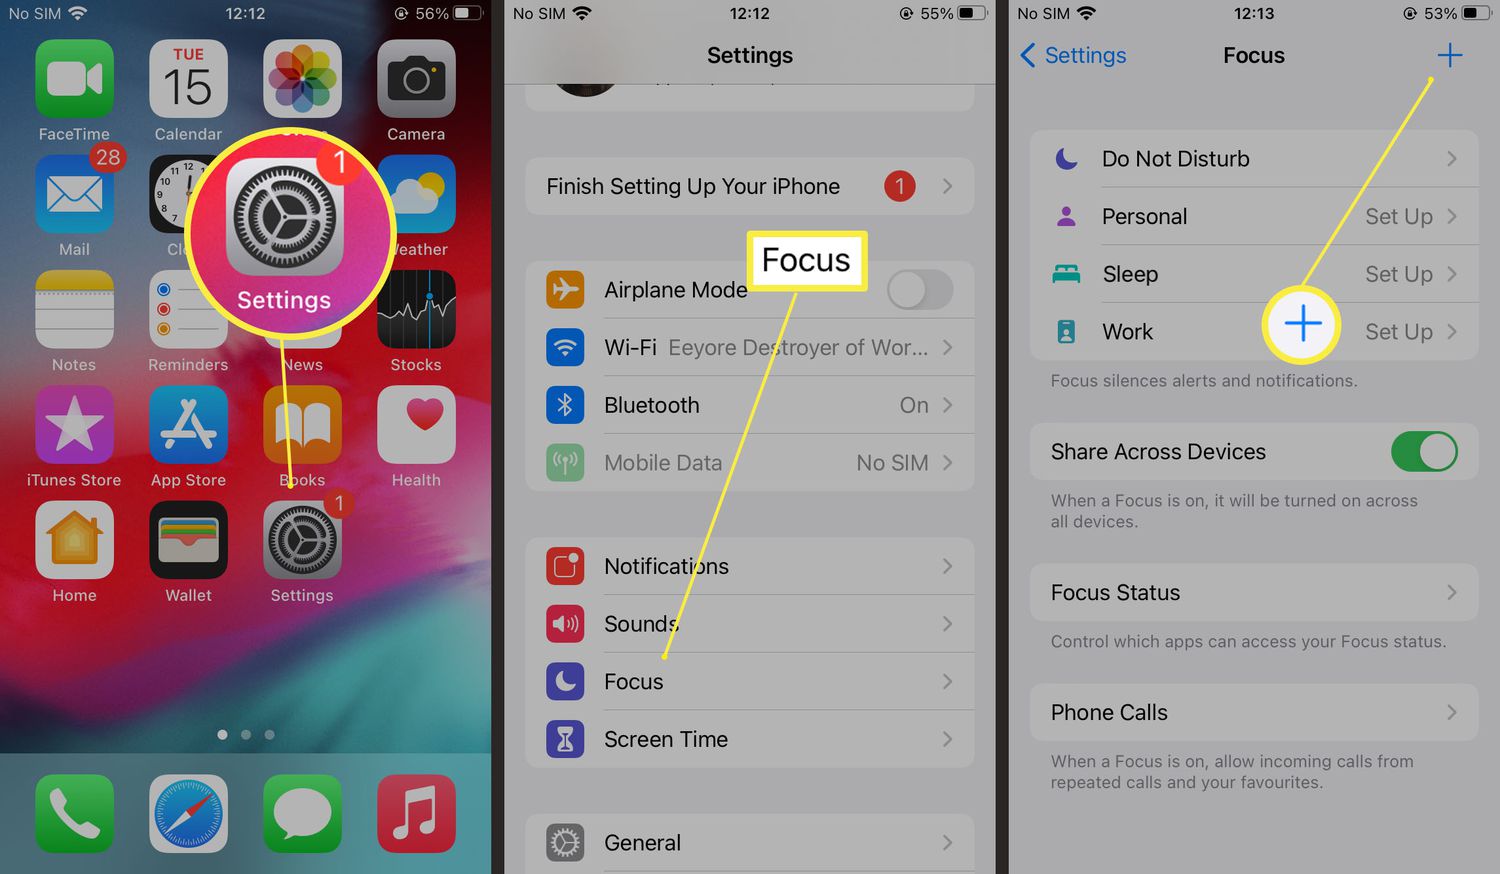 What is Share Focus Status on iPhone?